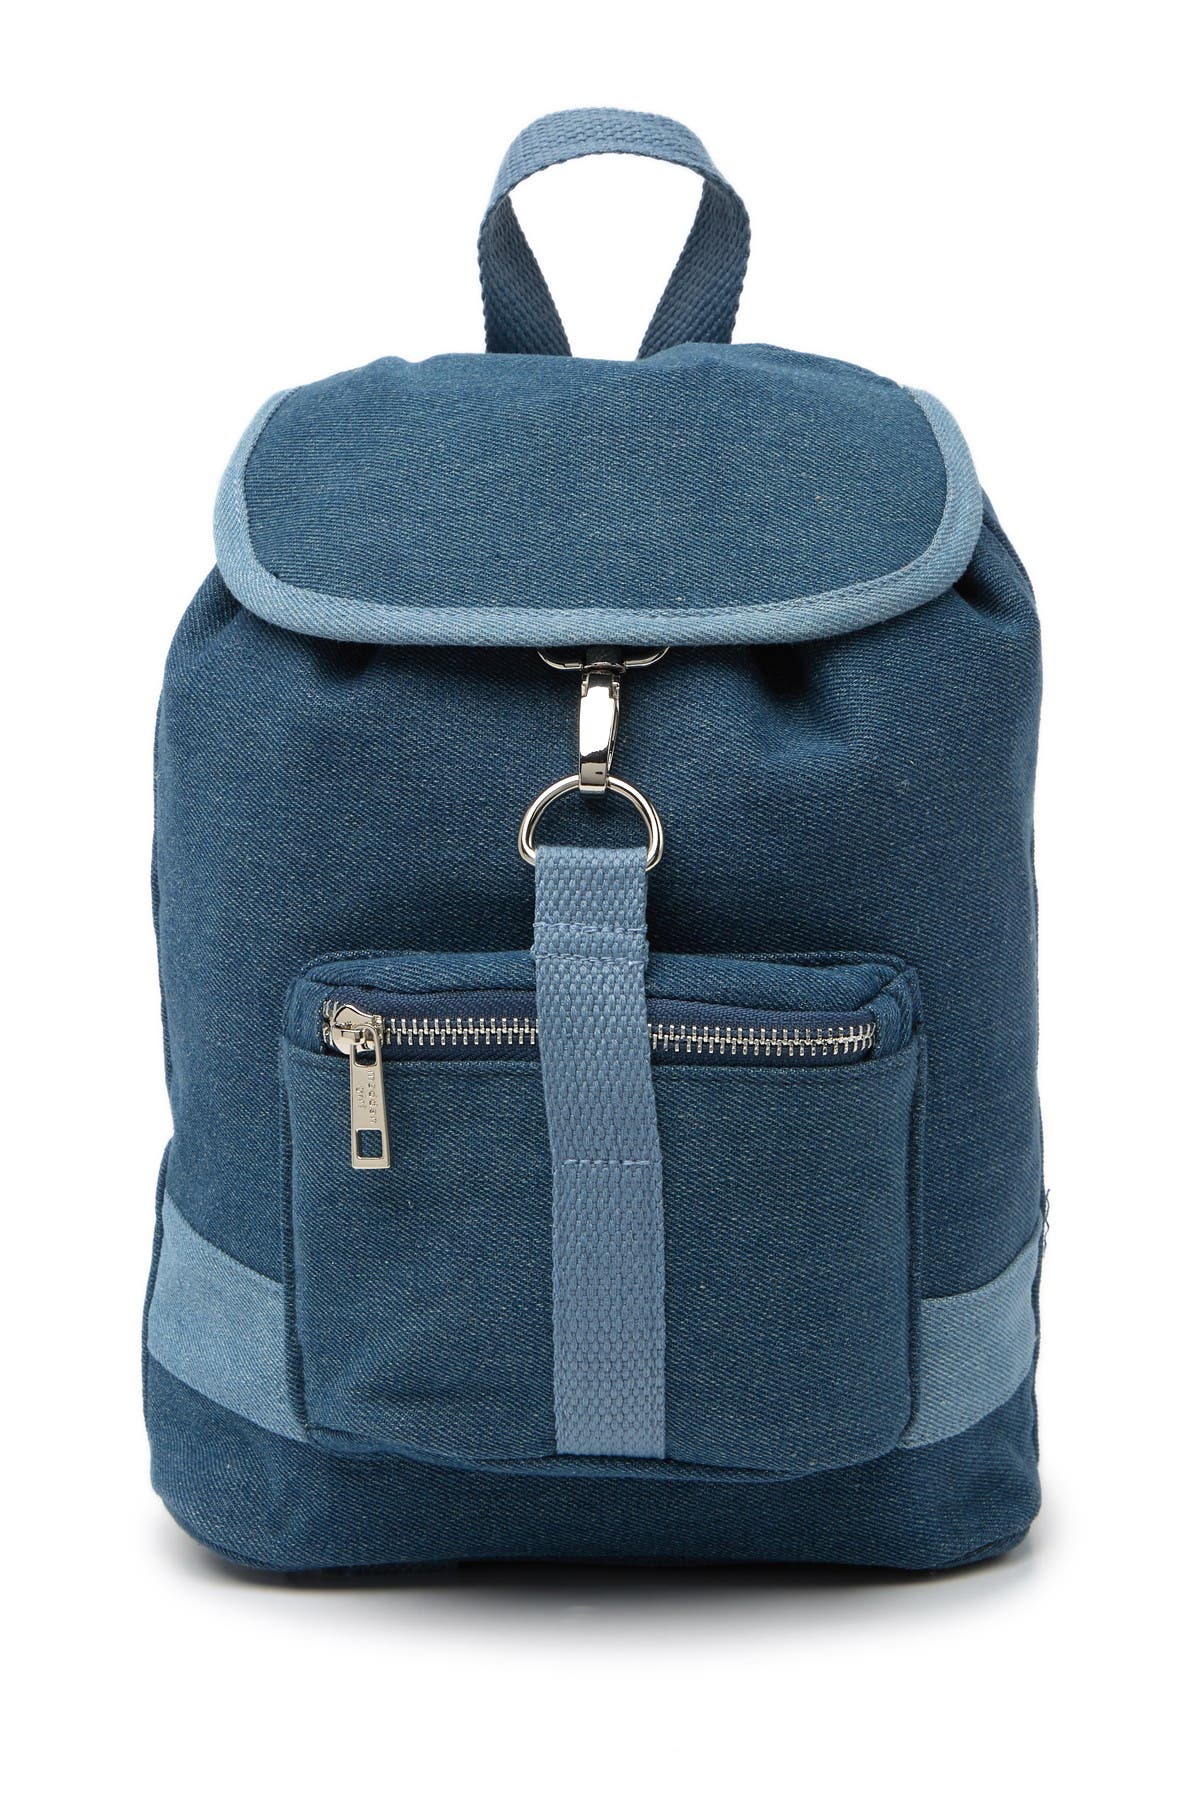 small grey backpack women's